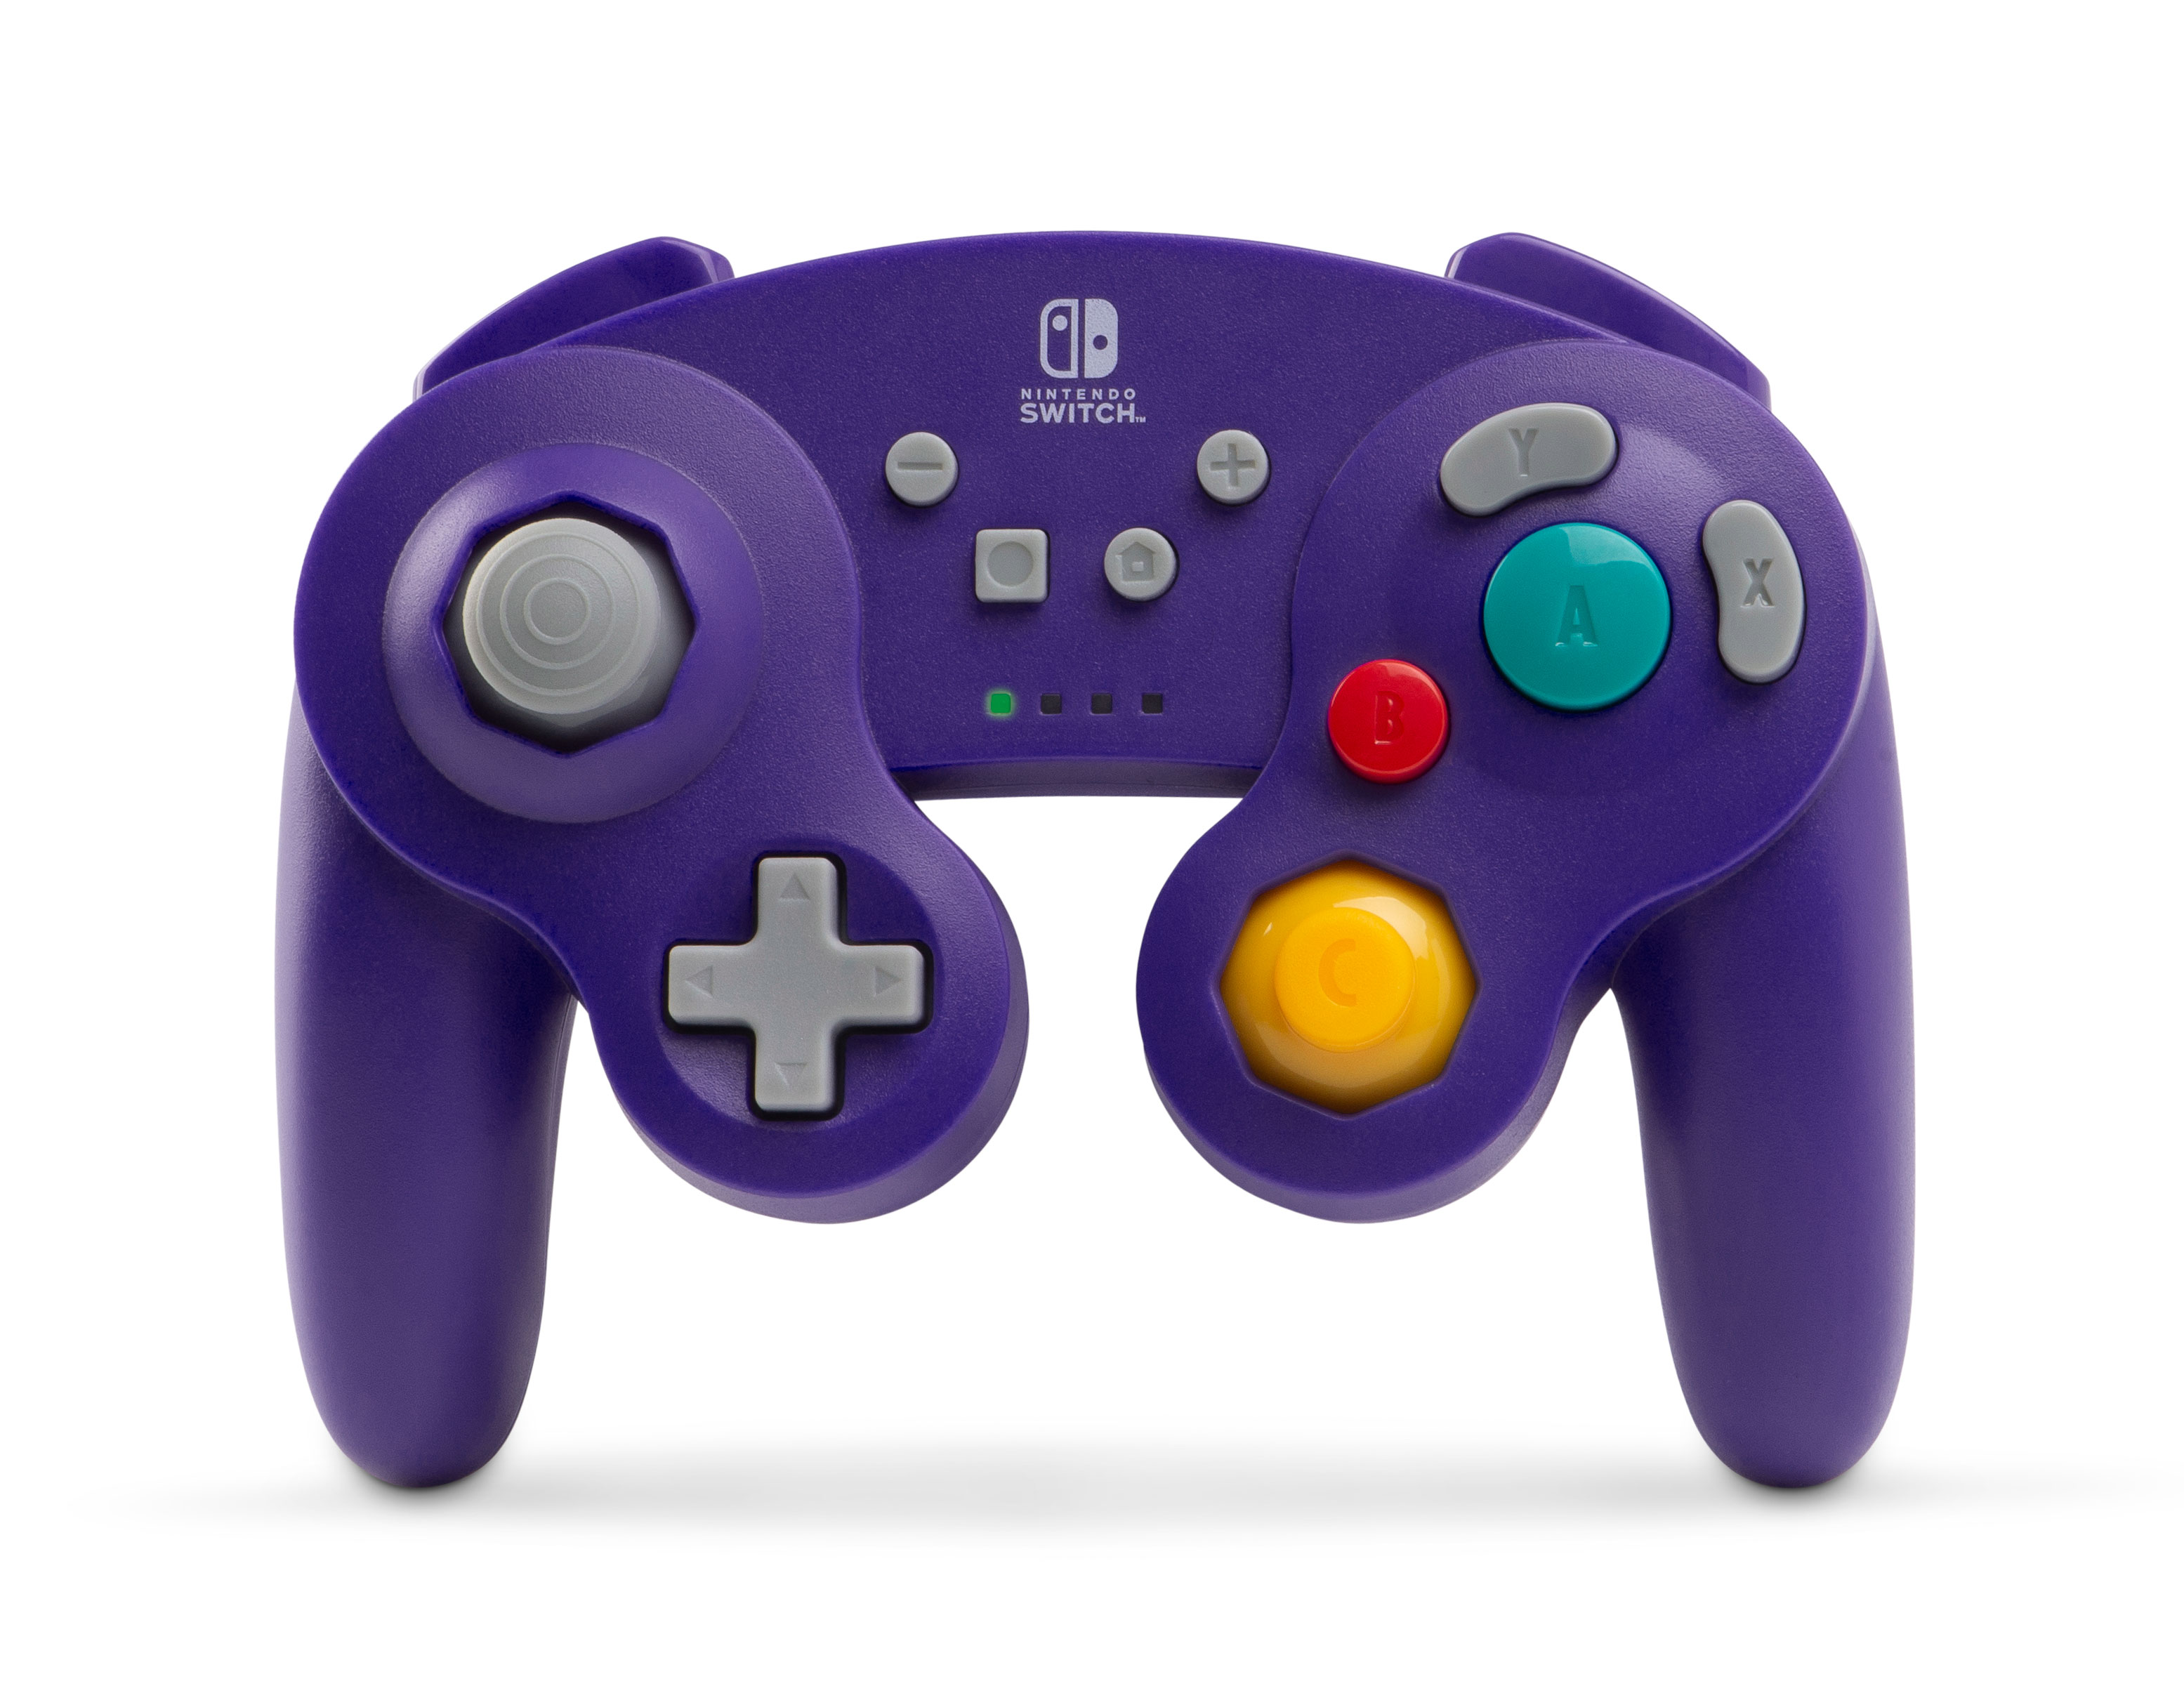 GameCube-style Wireless Controllers for Nintendo Switch Key